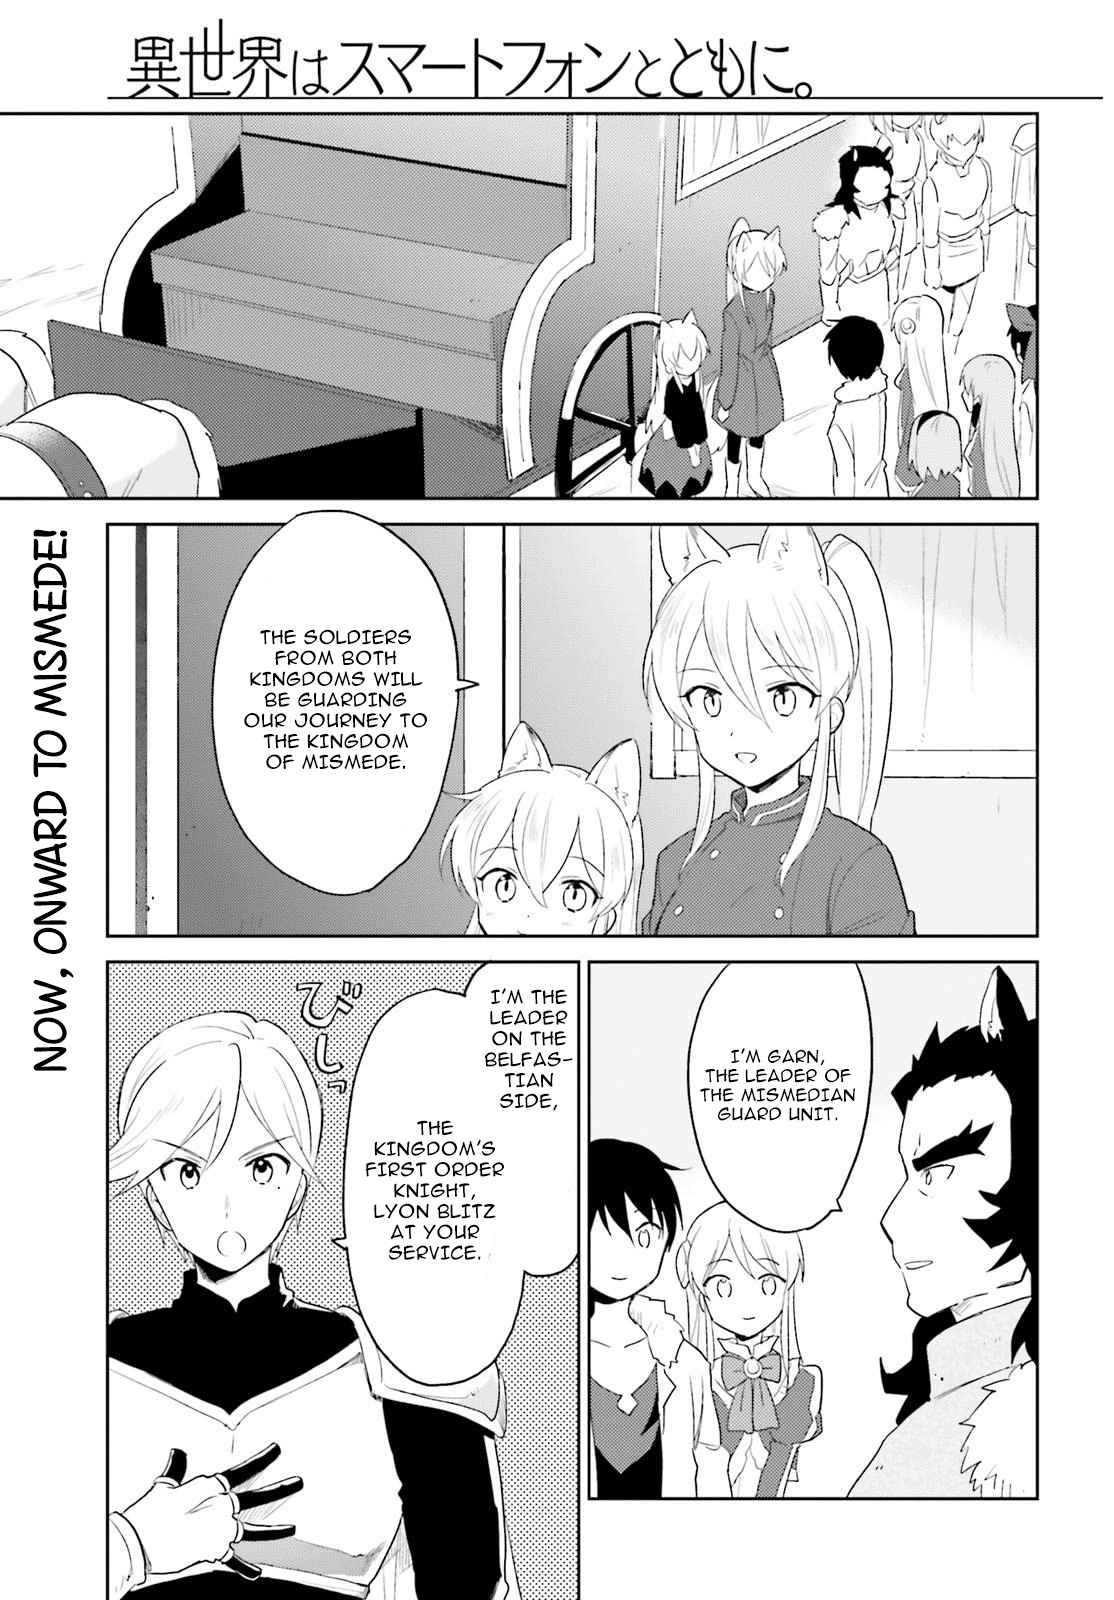 In Another World With My Smartphone Vol. 4 Ch. 17 Episode 17